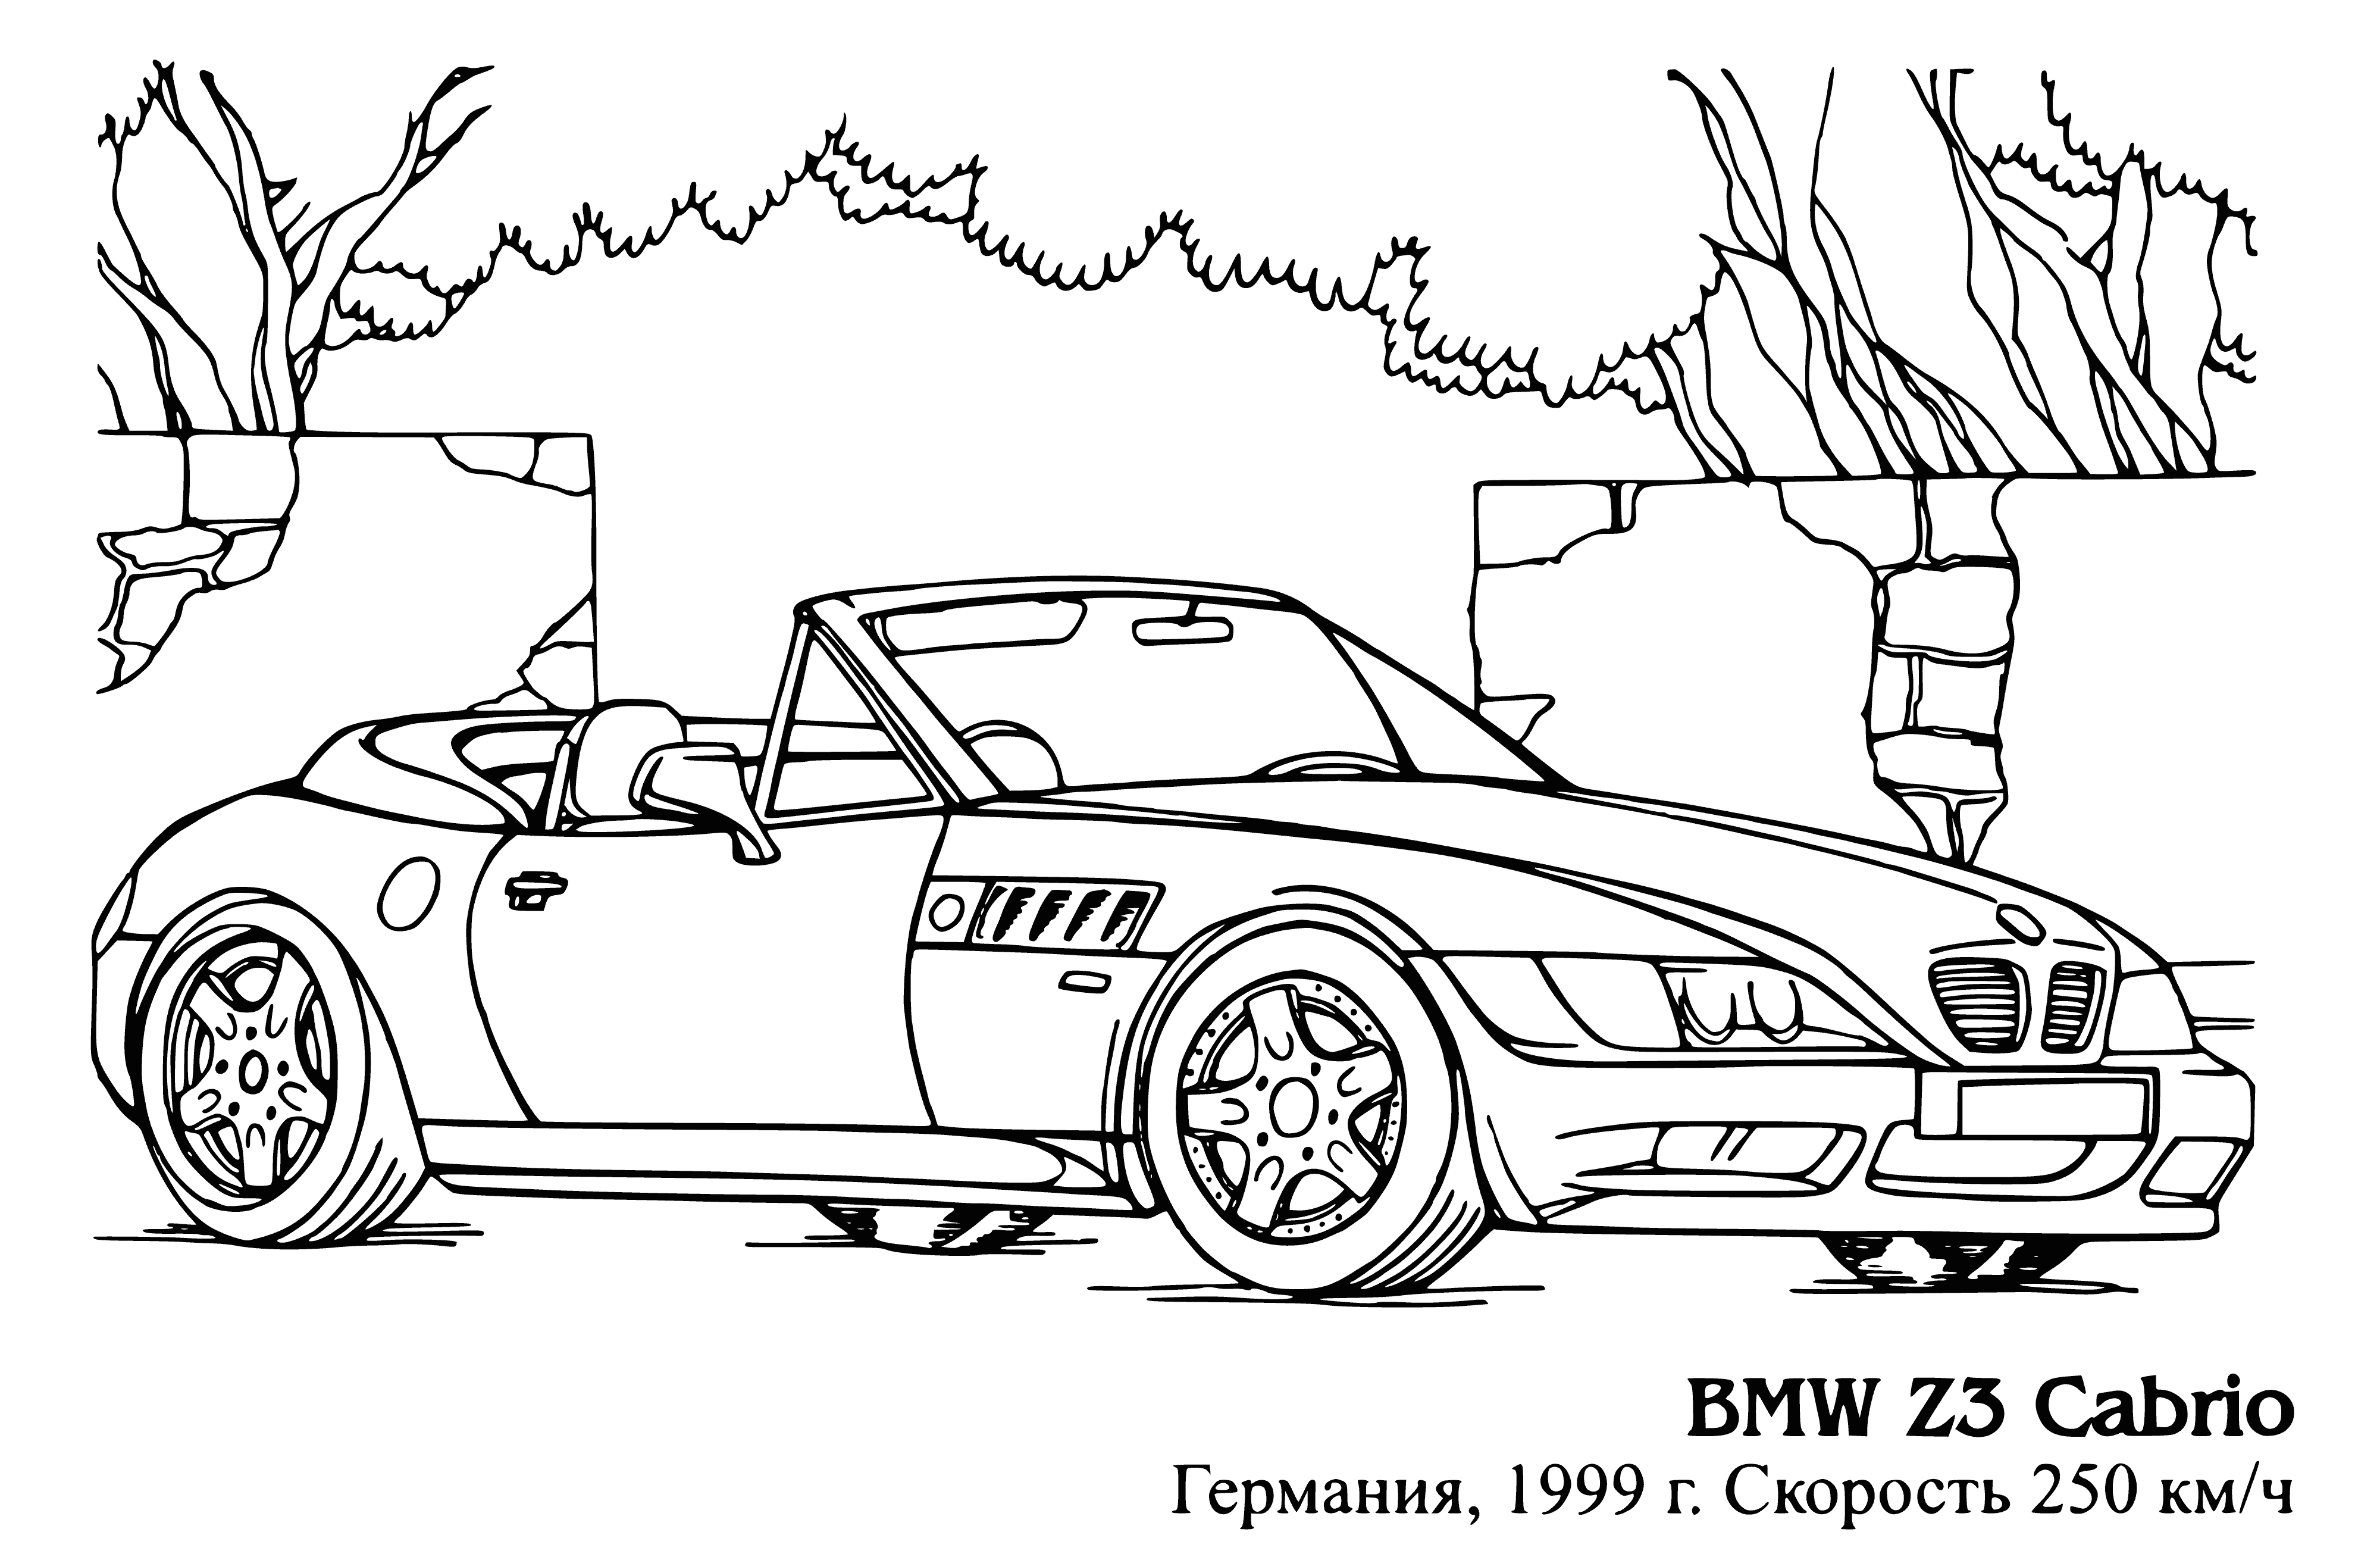 coloring page: Clorinling page of red convertible car with white stripes and black wheels. Chrome details make it stand out!